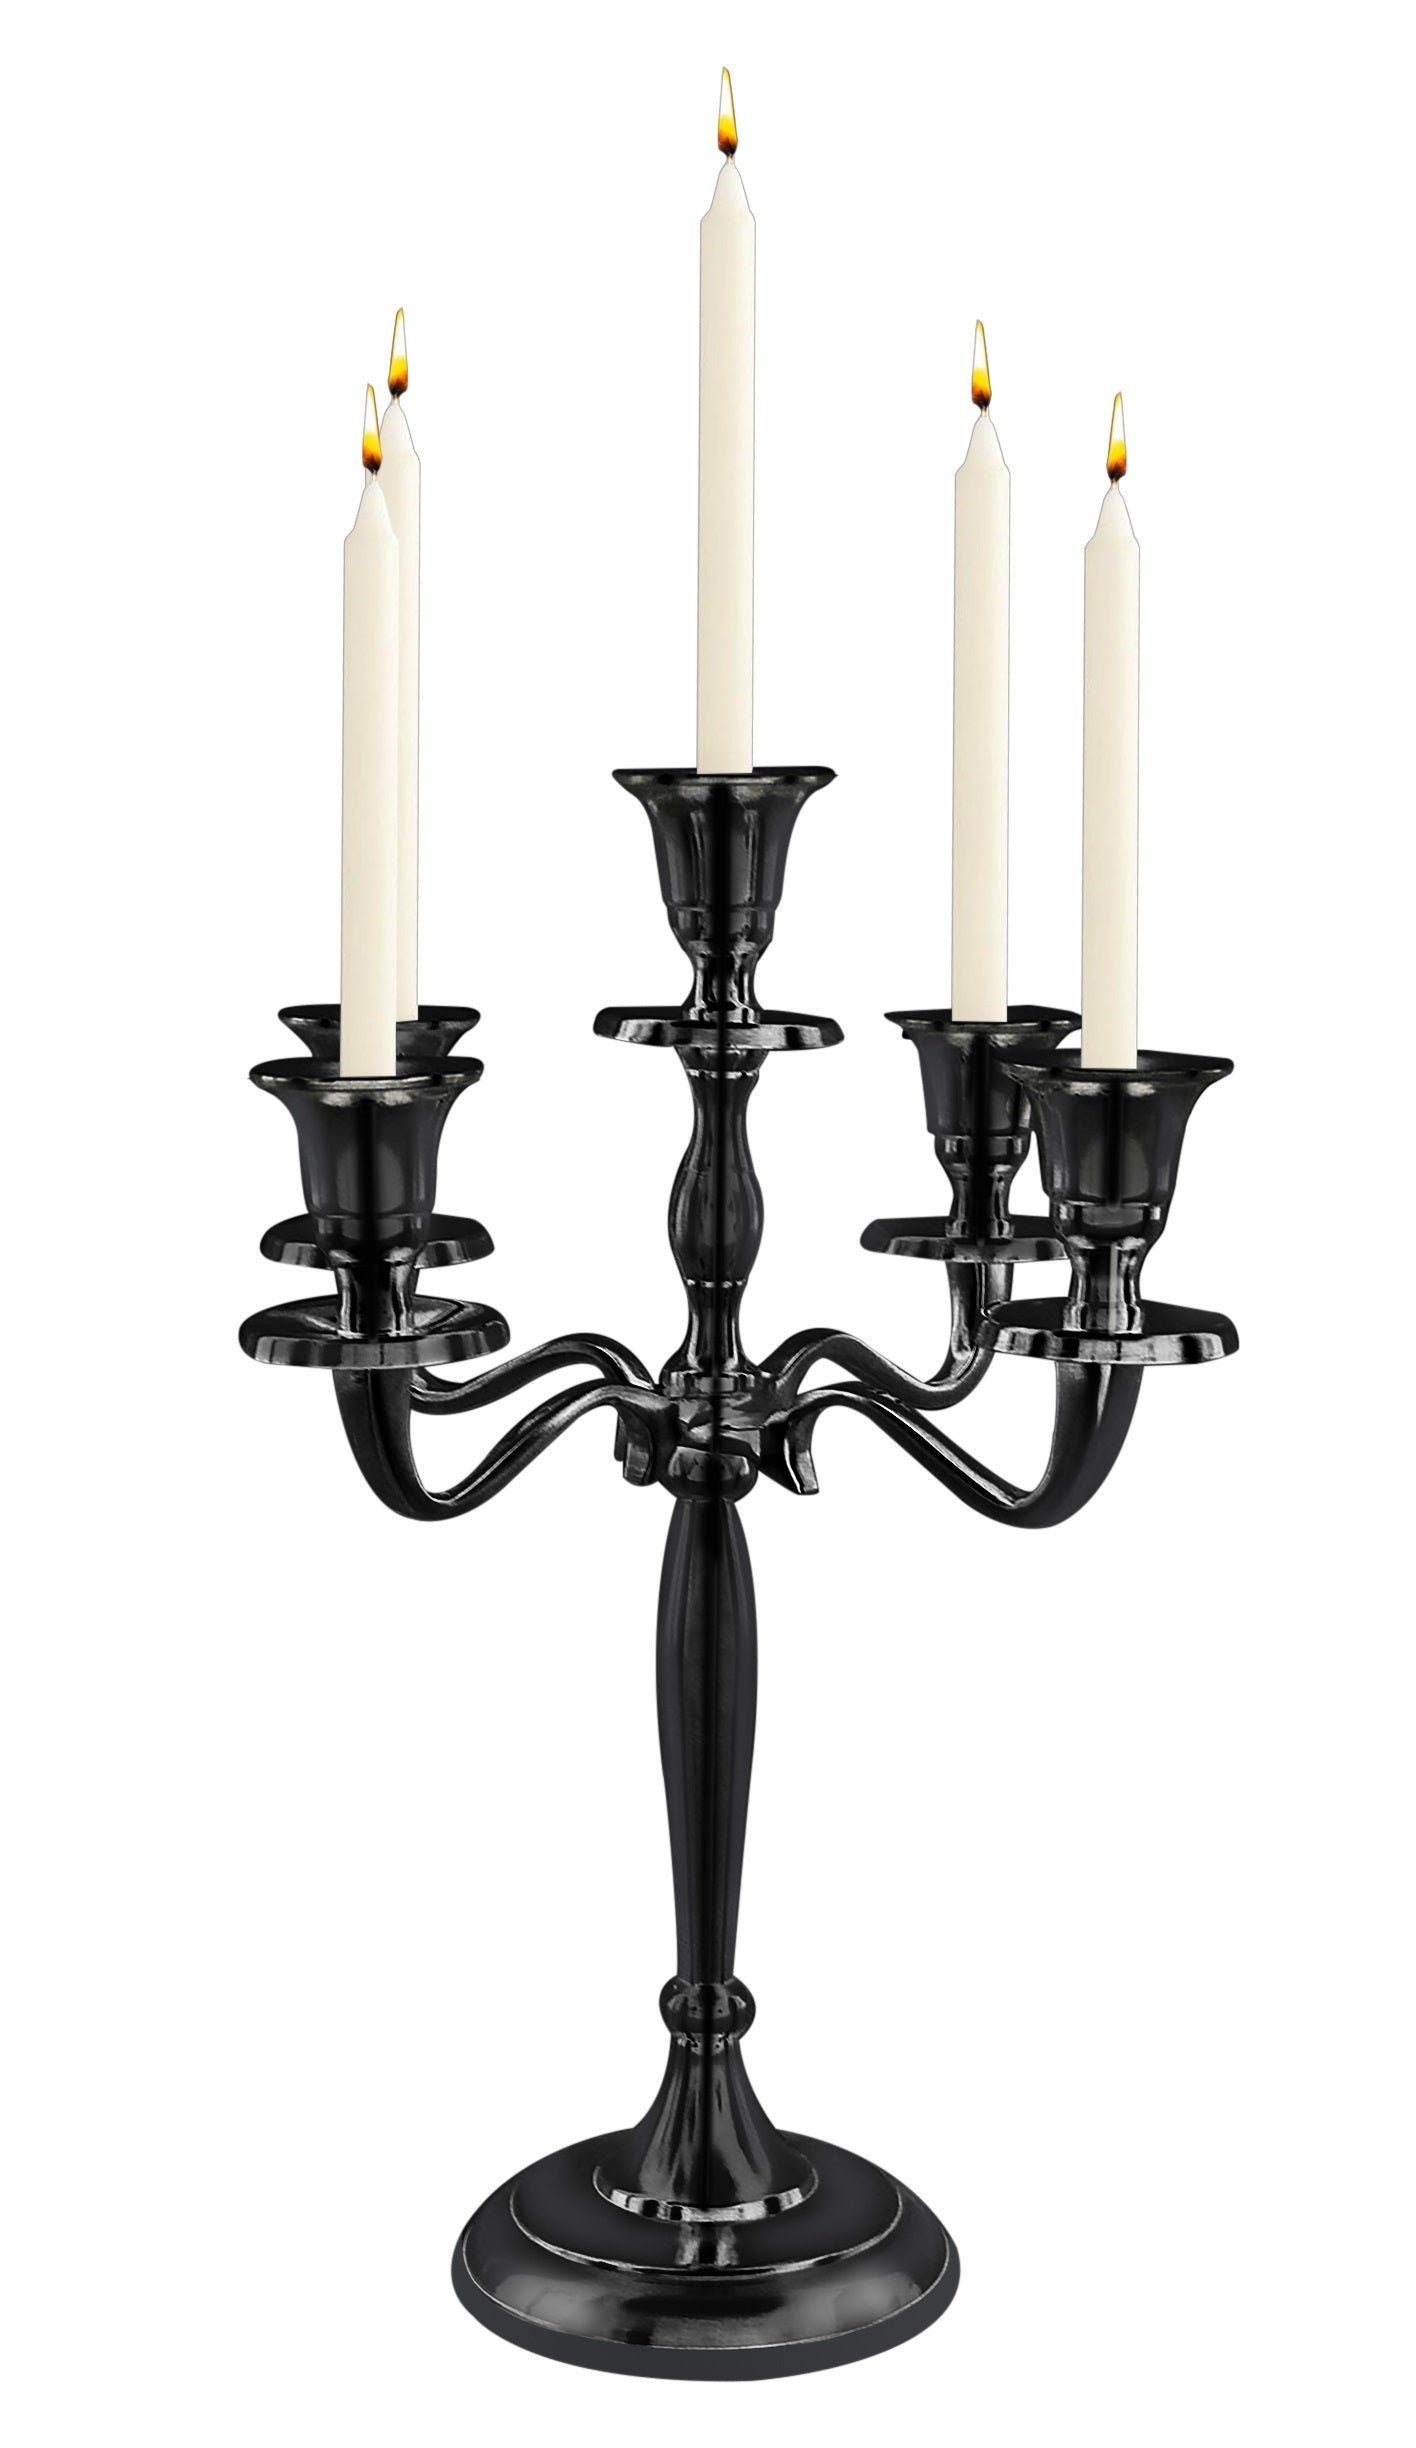 12" Inch Tall 5 Arm Candlestick Candelabra Candle Holder | Black Finish